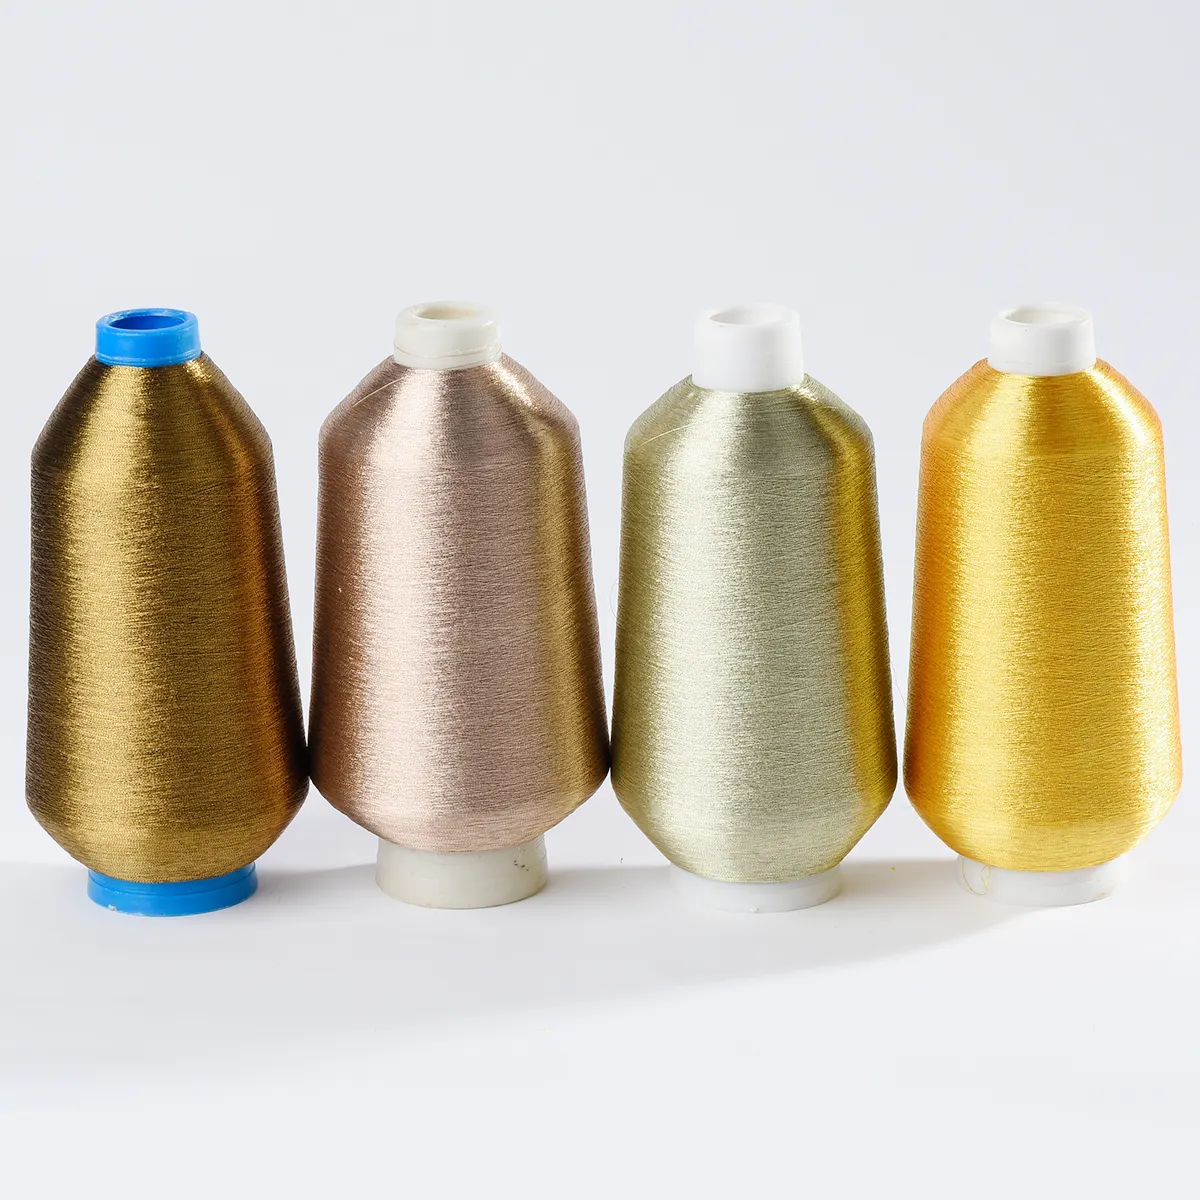 China M MX MH MS type metal gold elastic metallic thread yarn for embroidery